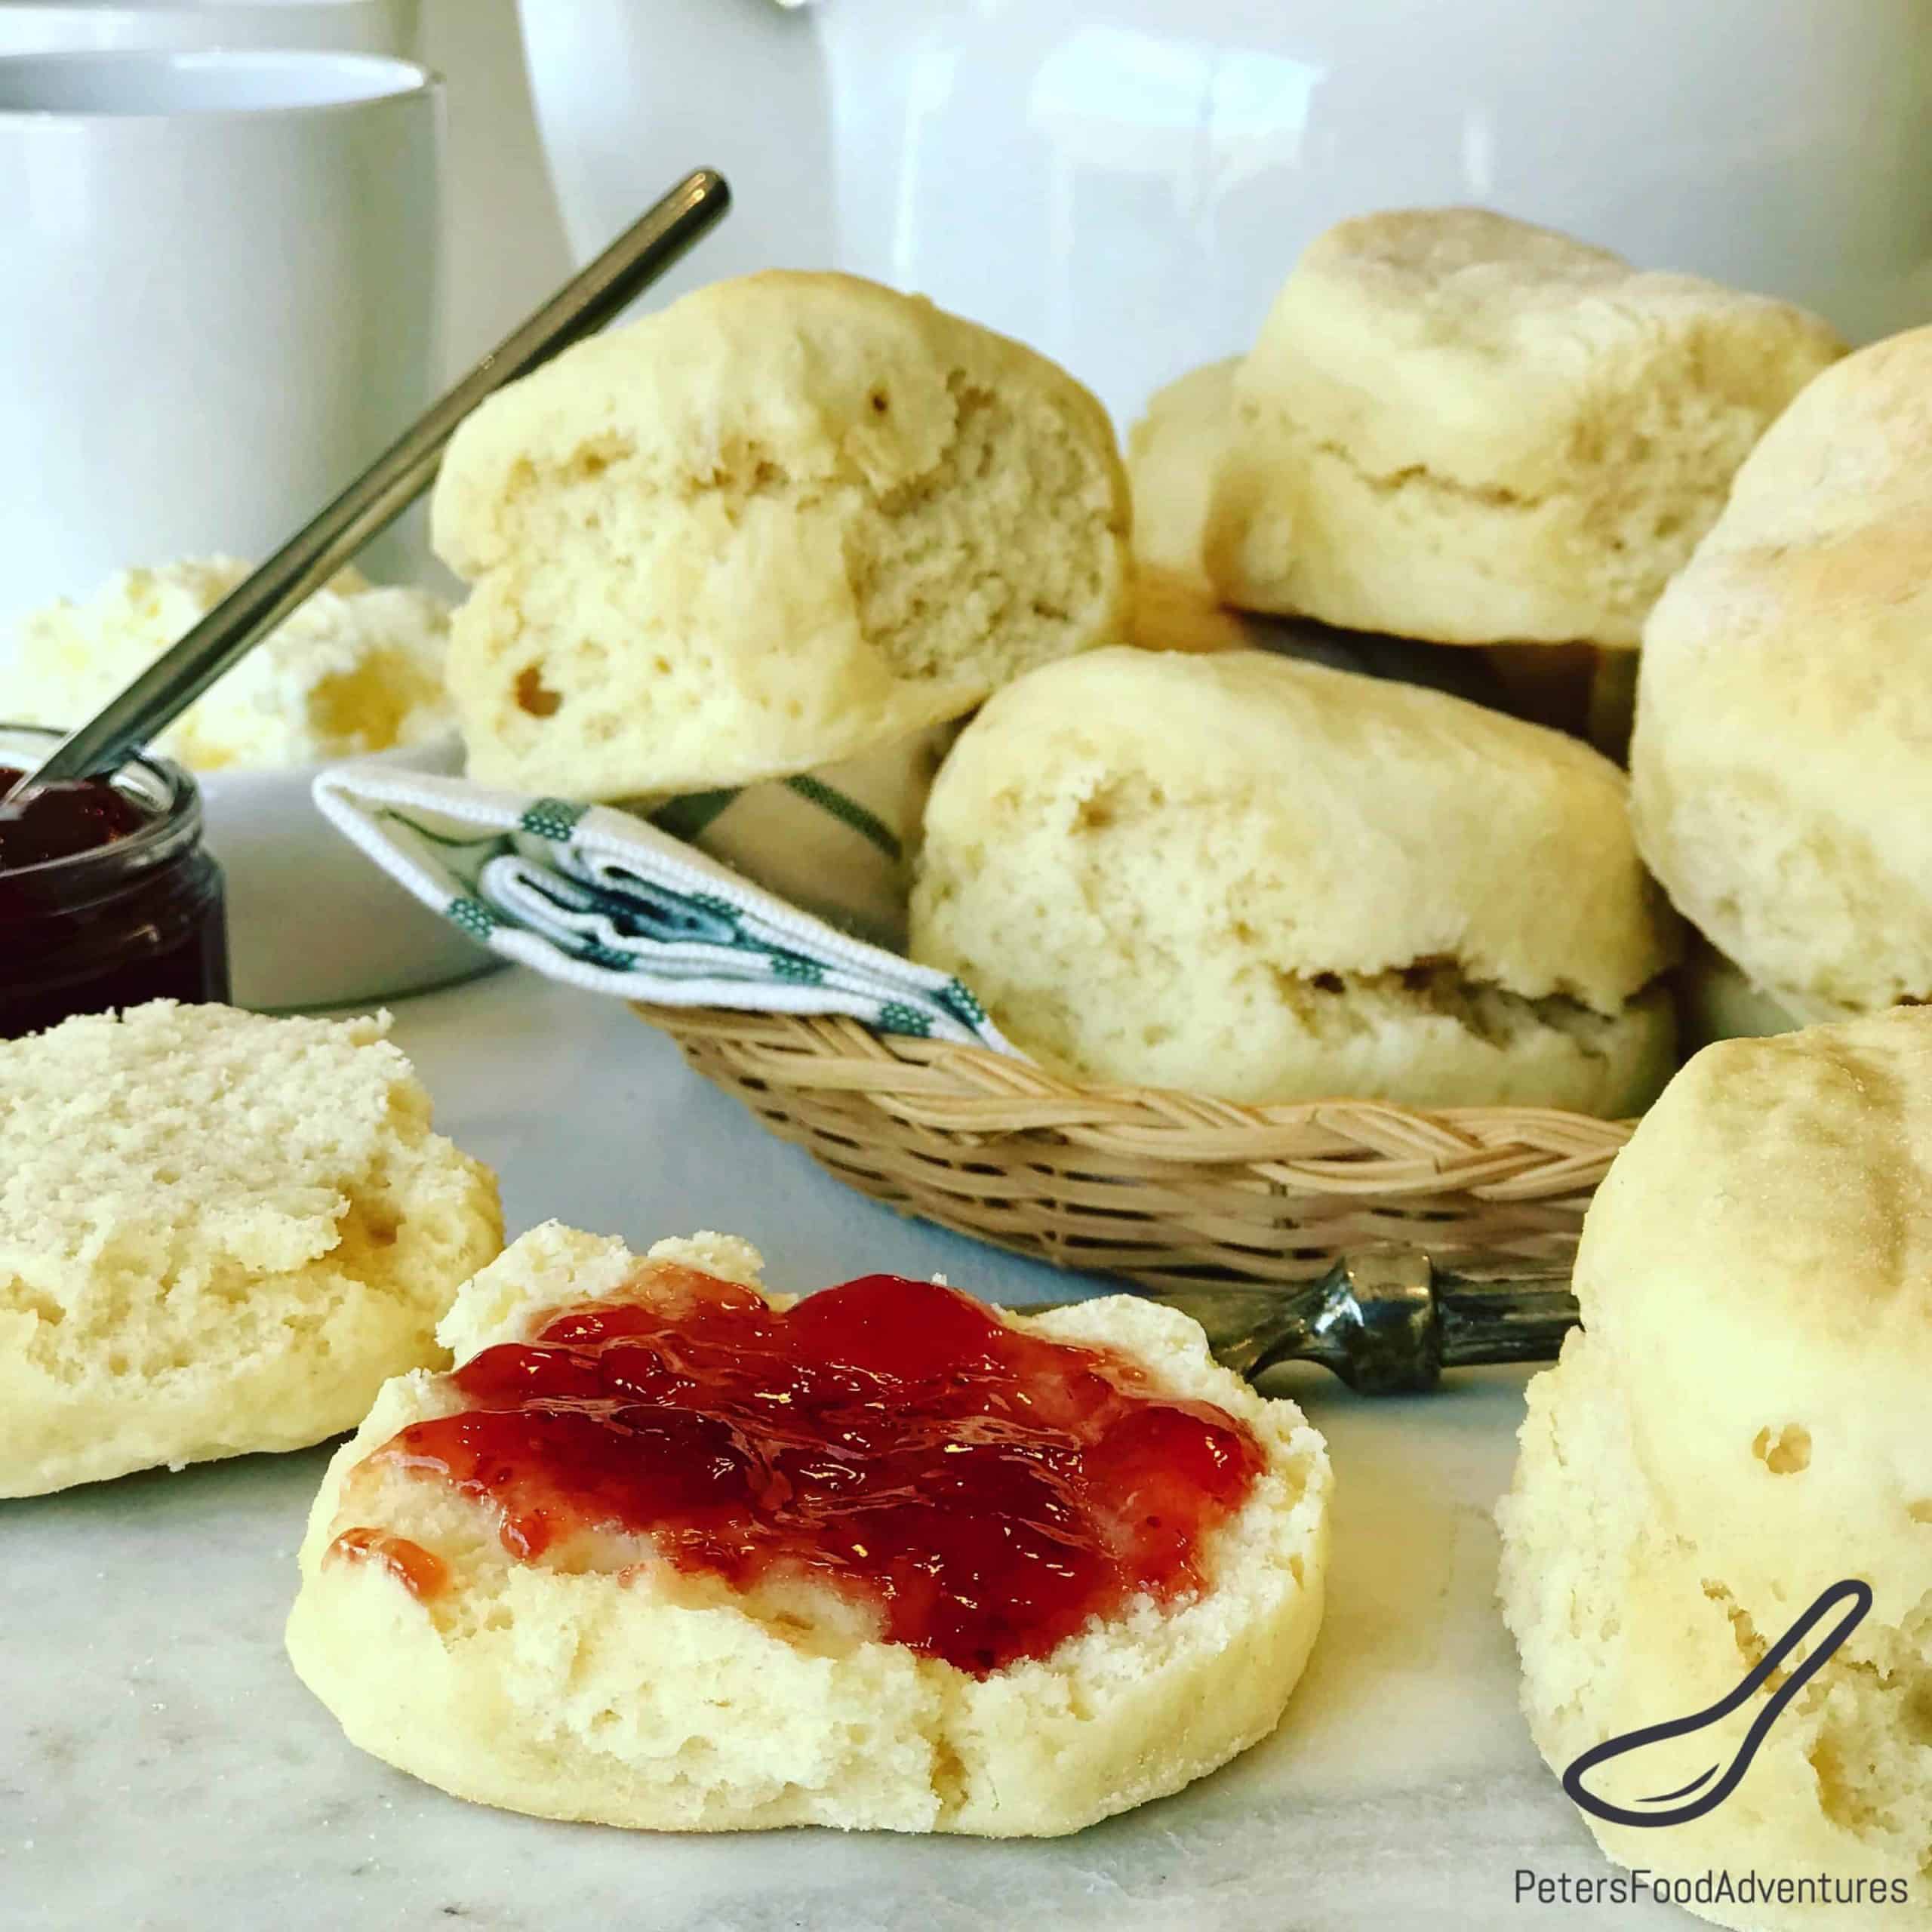 An Easy Scone Recipe made with 7 Up or Sprite. Known as Lemonade Scones in Australia, made with only 3 ingredients! Similar to 7 UP Biscuits. Serve with jam and fresh whipped cream. I love scones for breakfast.